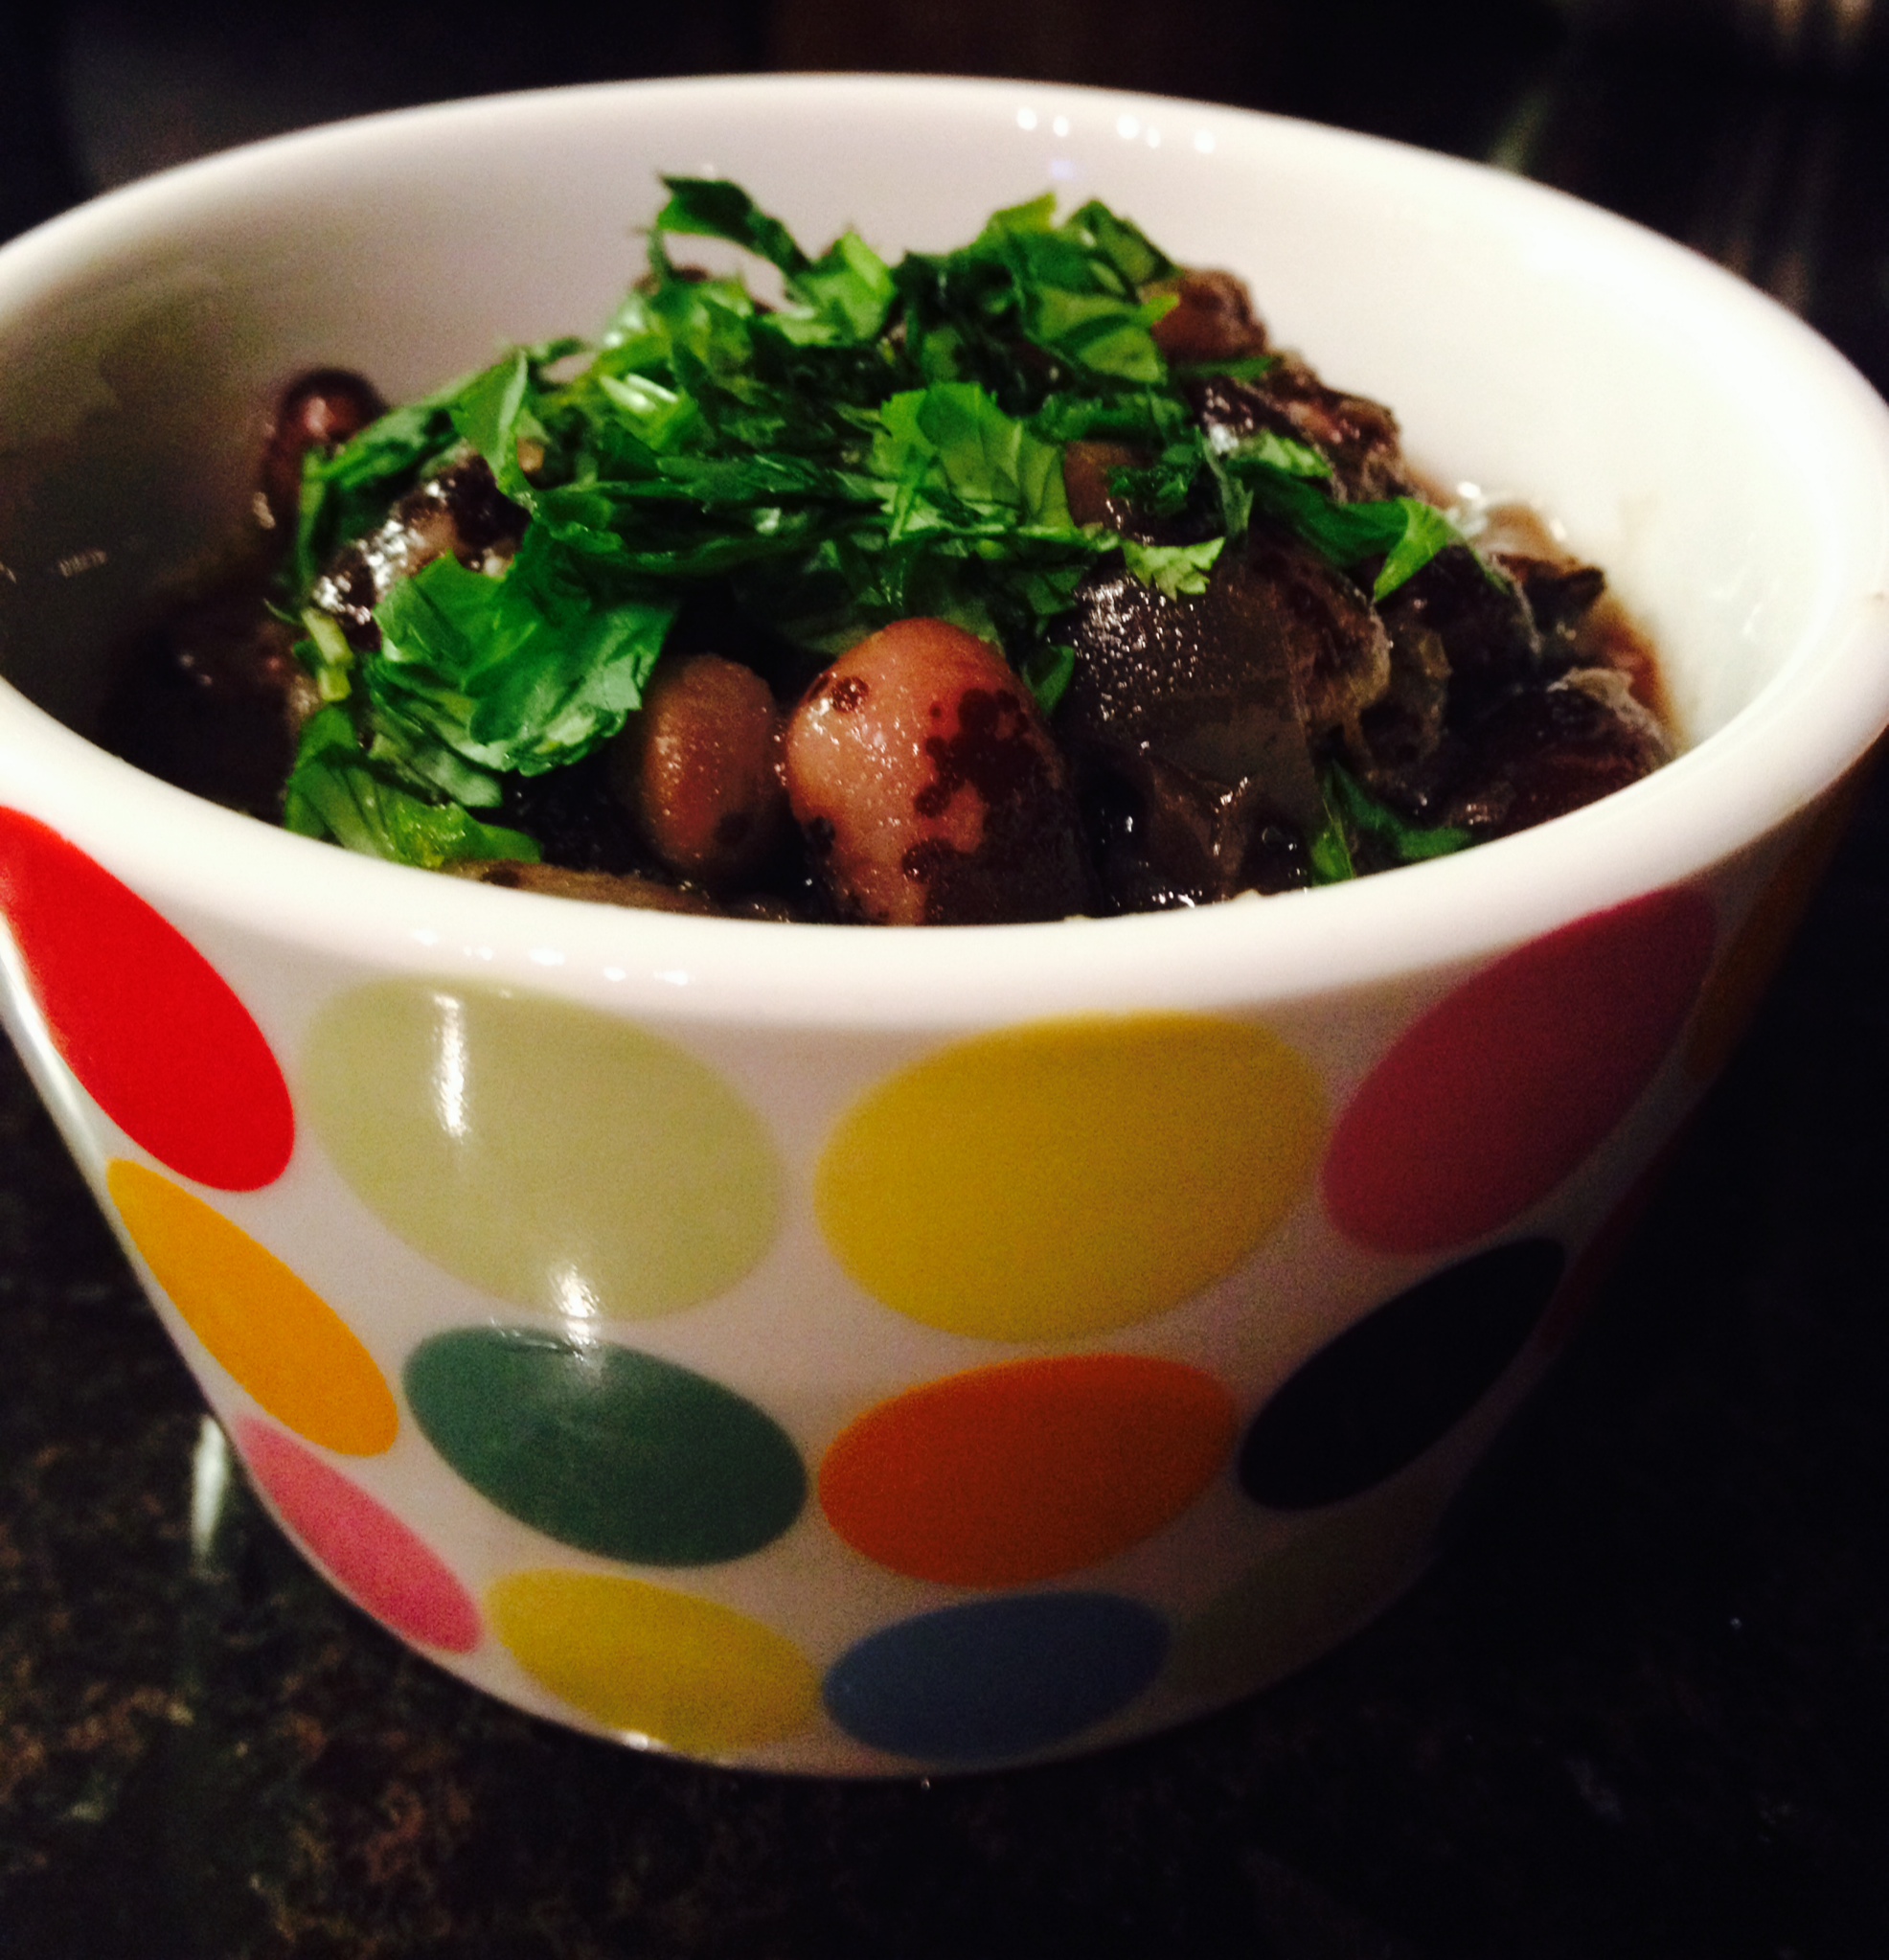 slow cooked vaquero beans with onion, garlic, and oregano :: by radish*rose